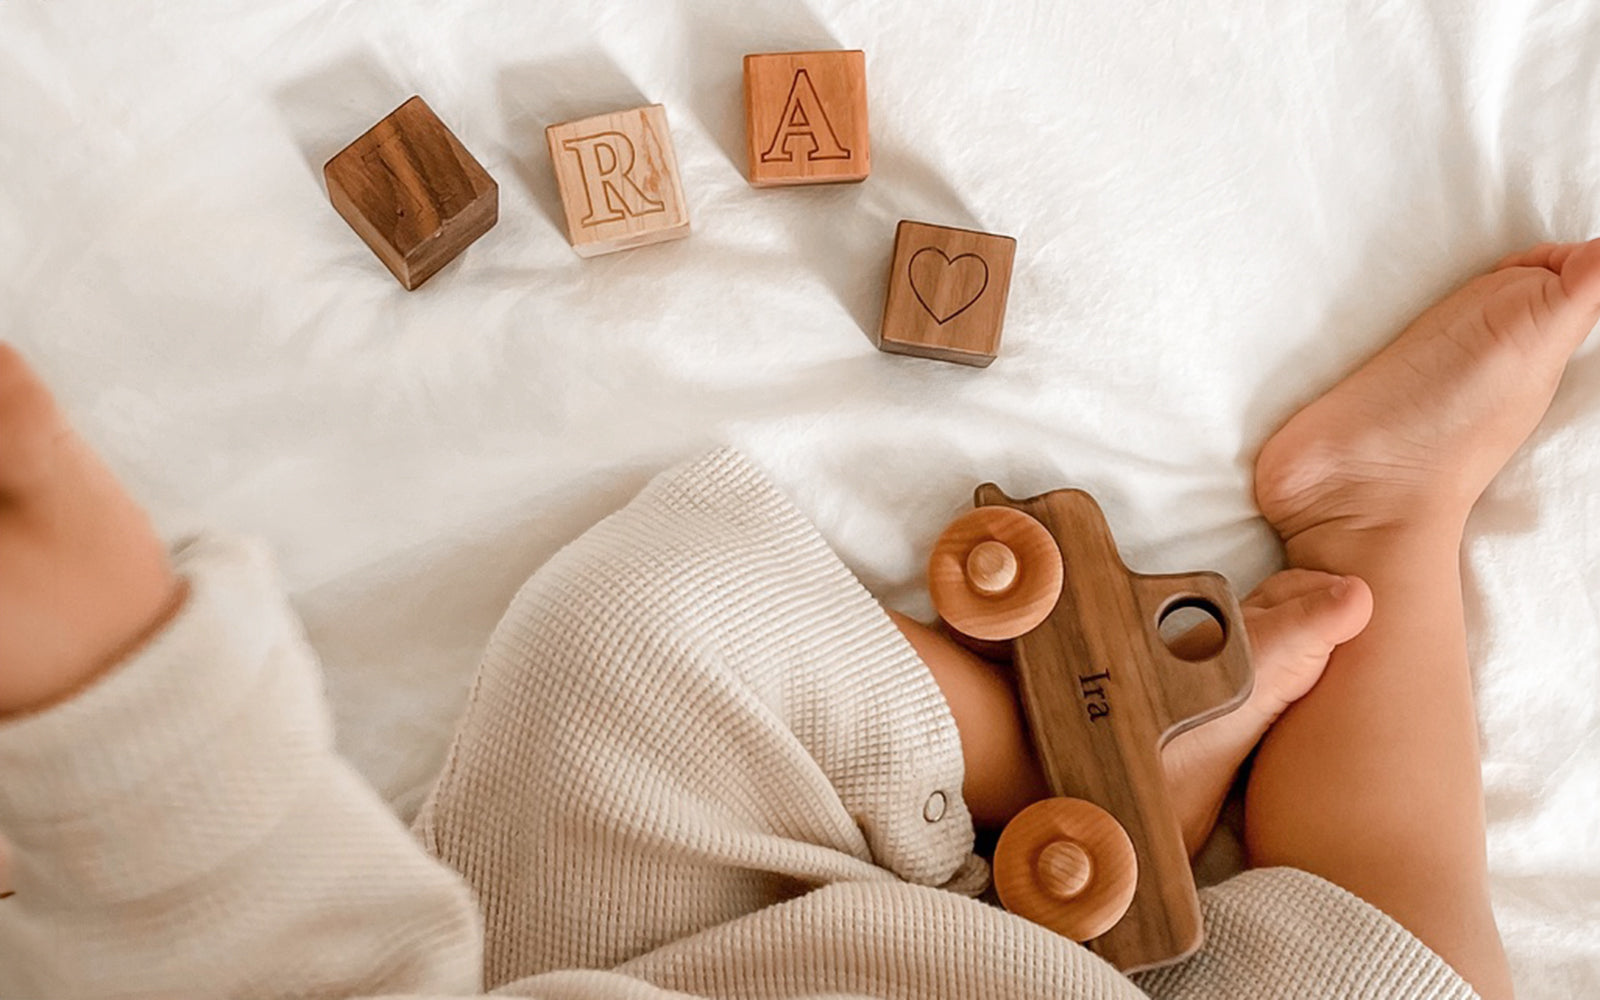 Gift Guide: Wooden toys made in South Africa